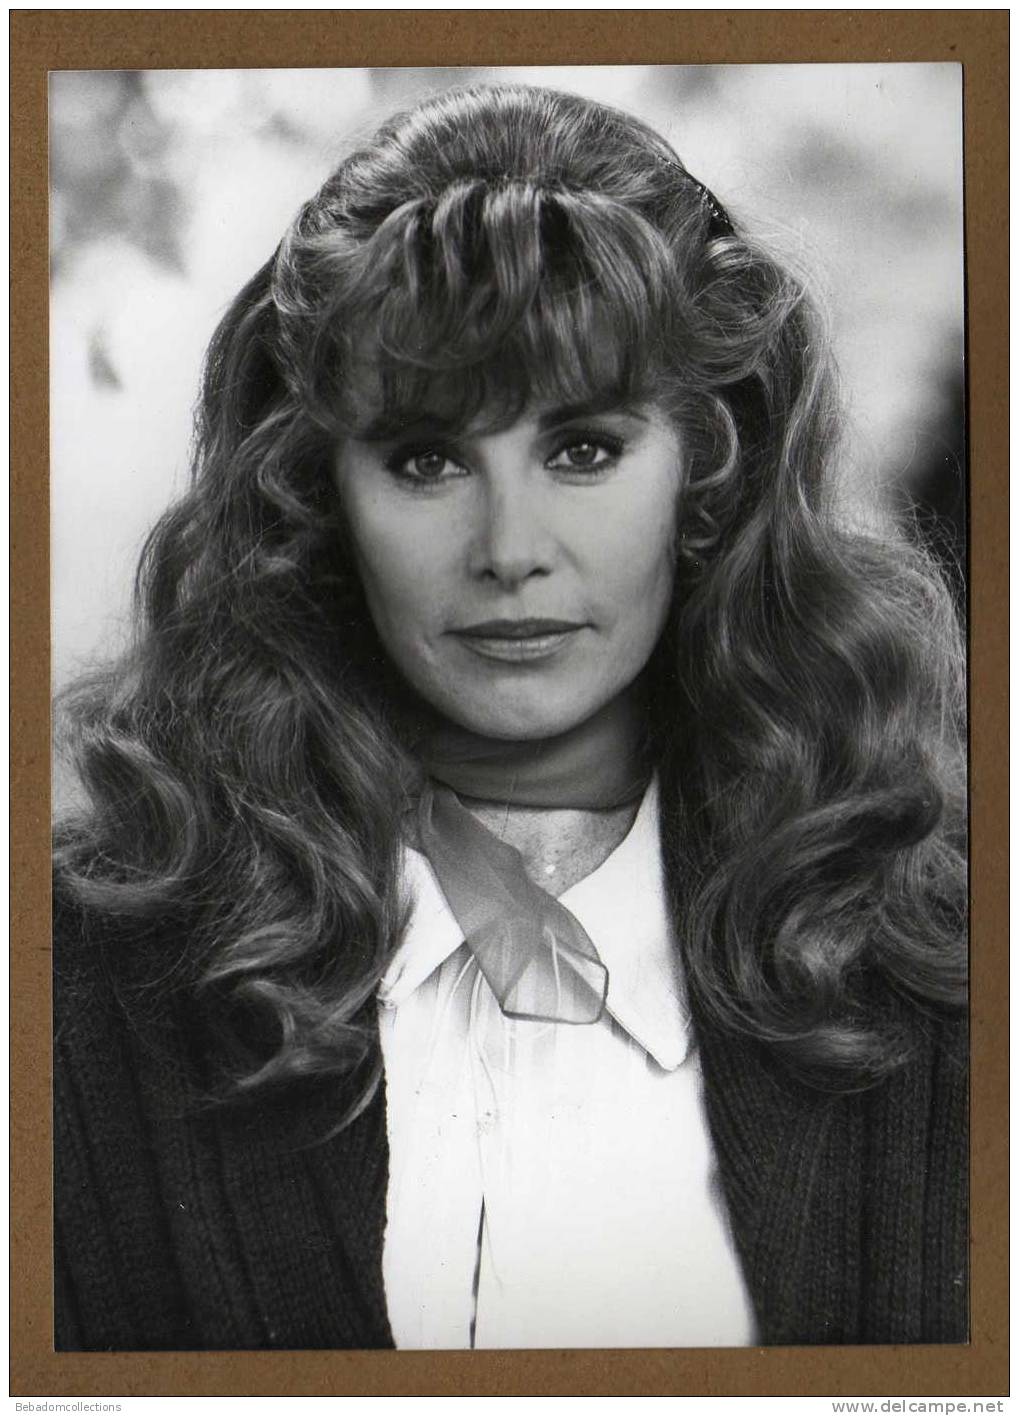 More Pictures Of Stefanie Powers. 